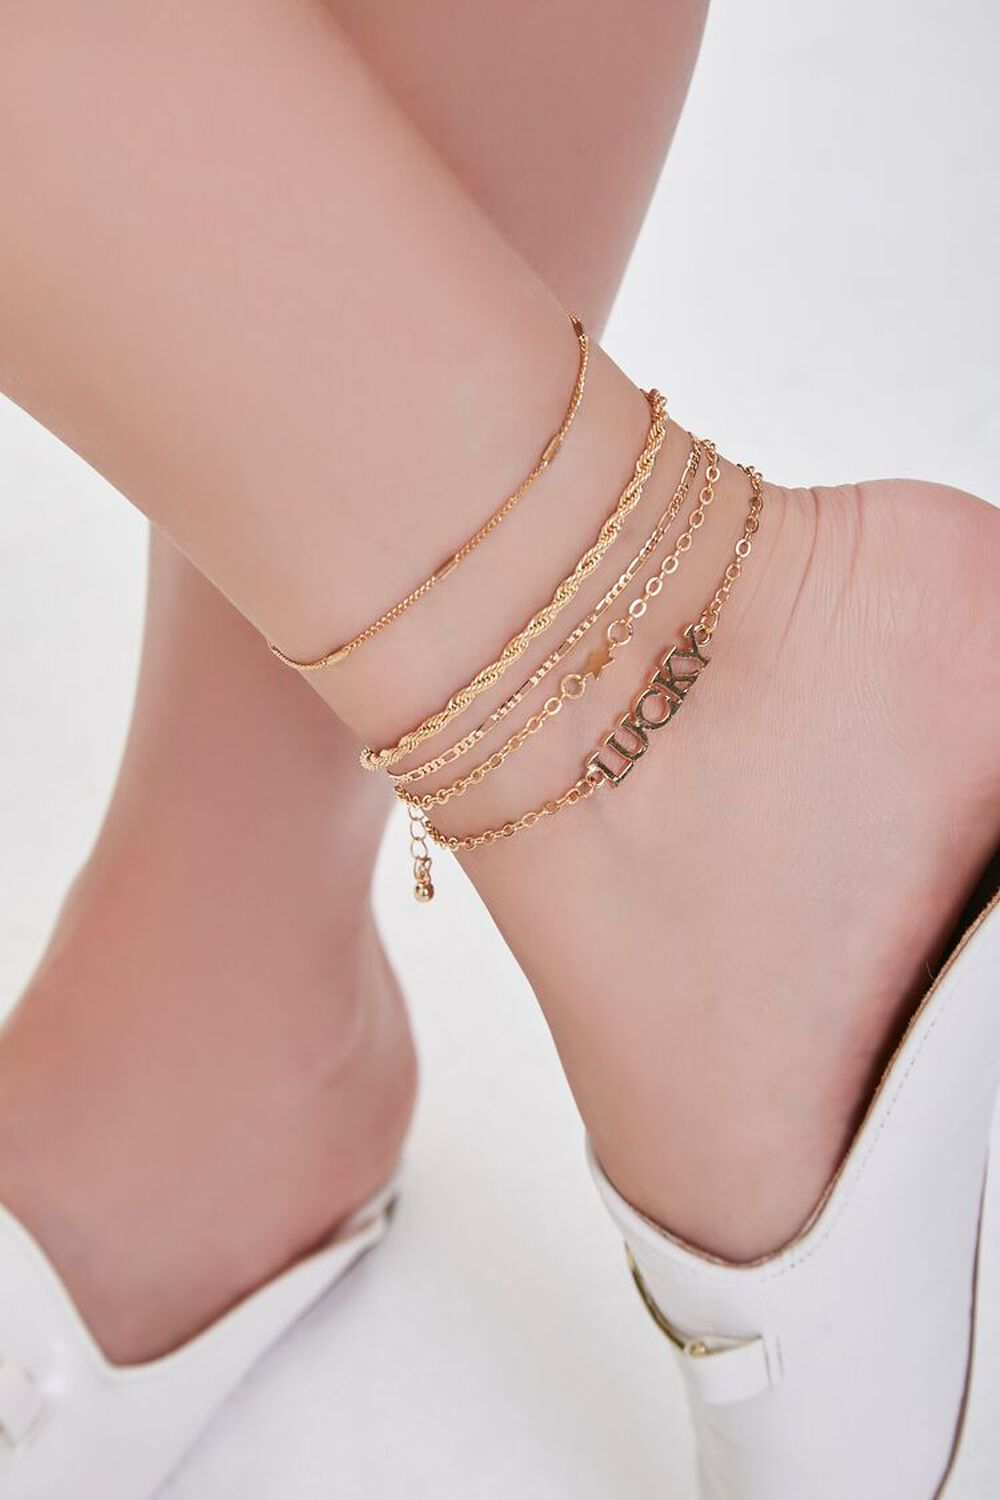 GOLD Lucky Charm Anklet Set, image 1